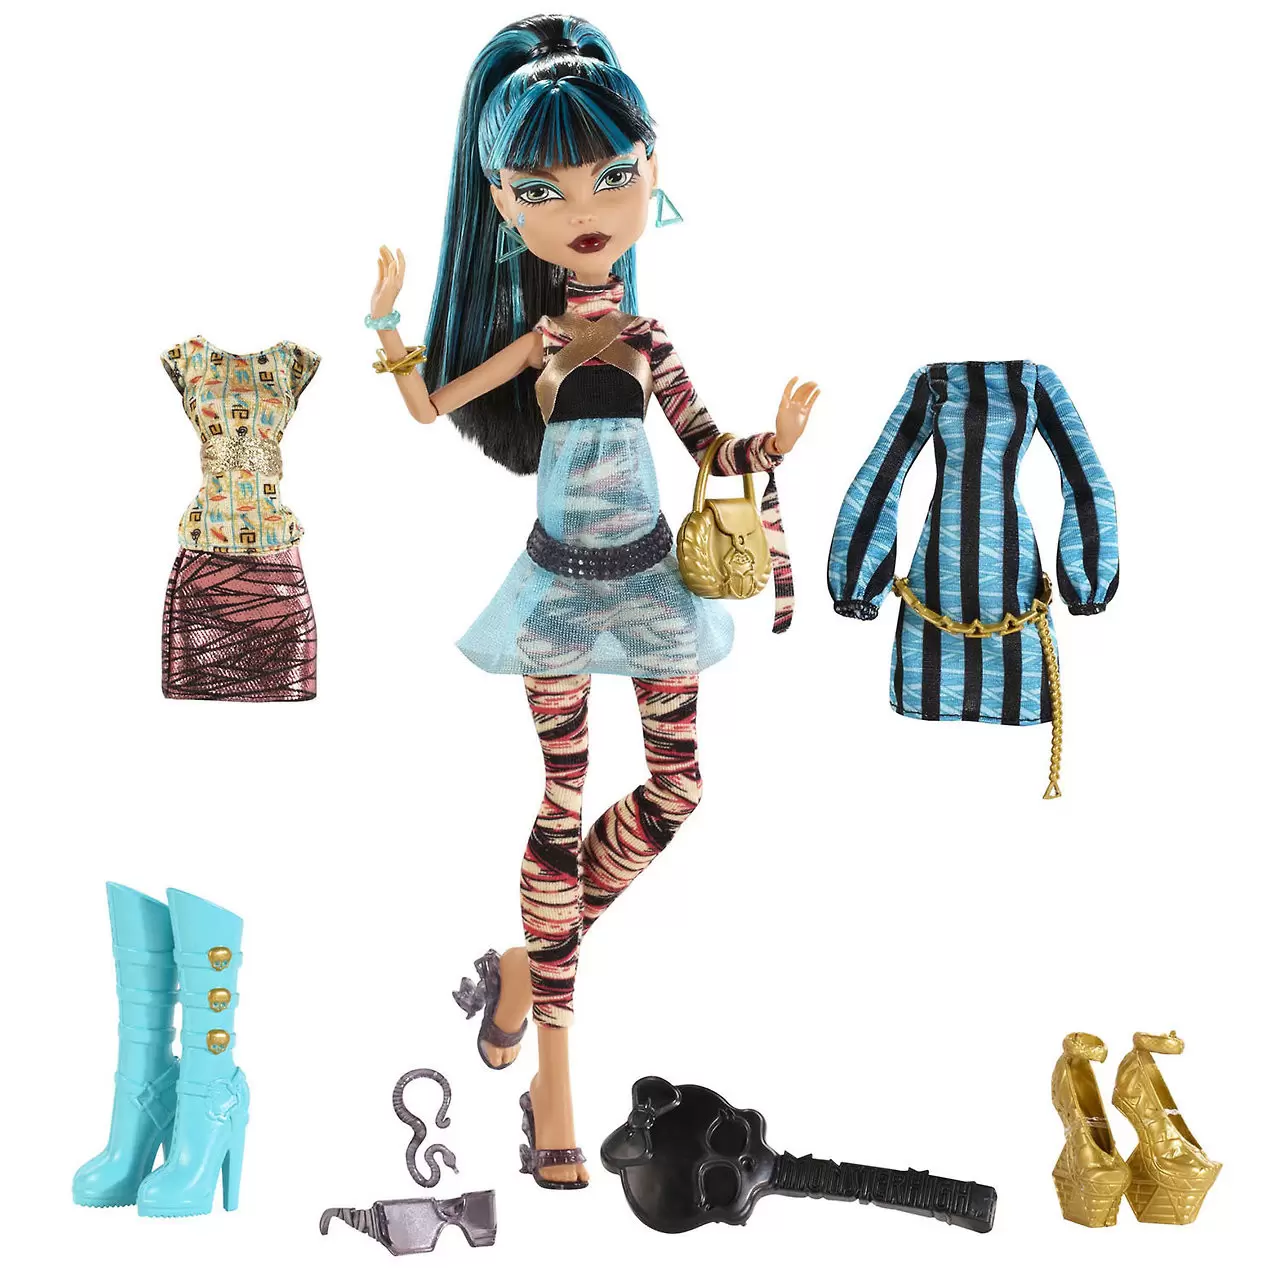 Monster High Dolls - Cleo de Nile - Ghouliciously Gore-geous Fashions